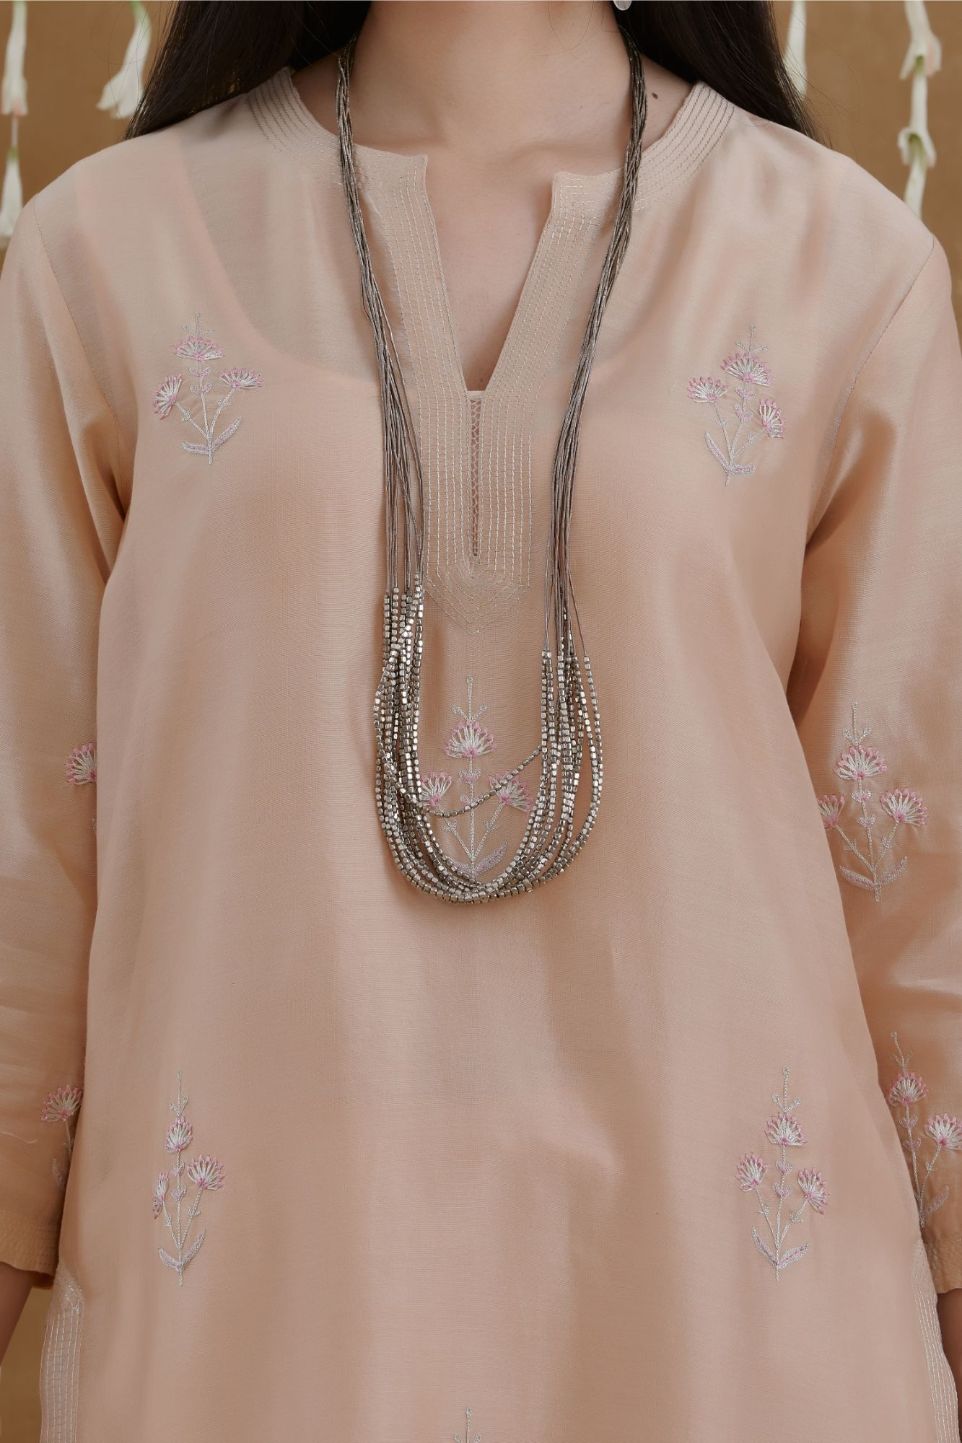 Peach staright kurta set highlighted with all-over silver zari and contrast coloured thread embroidery